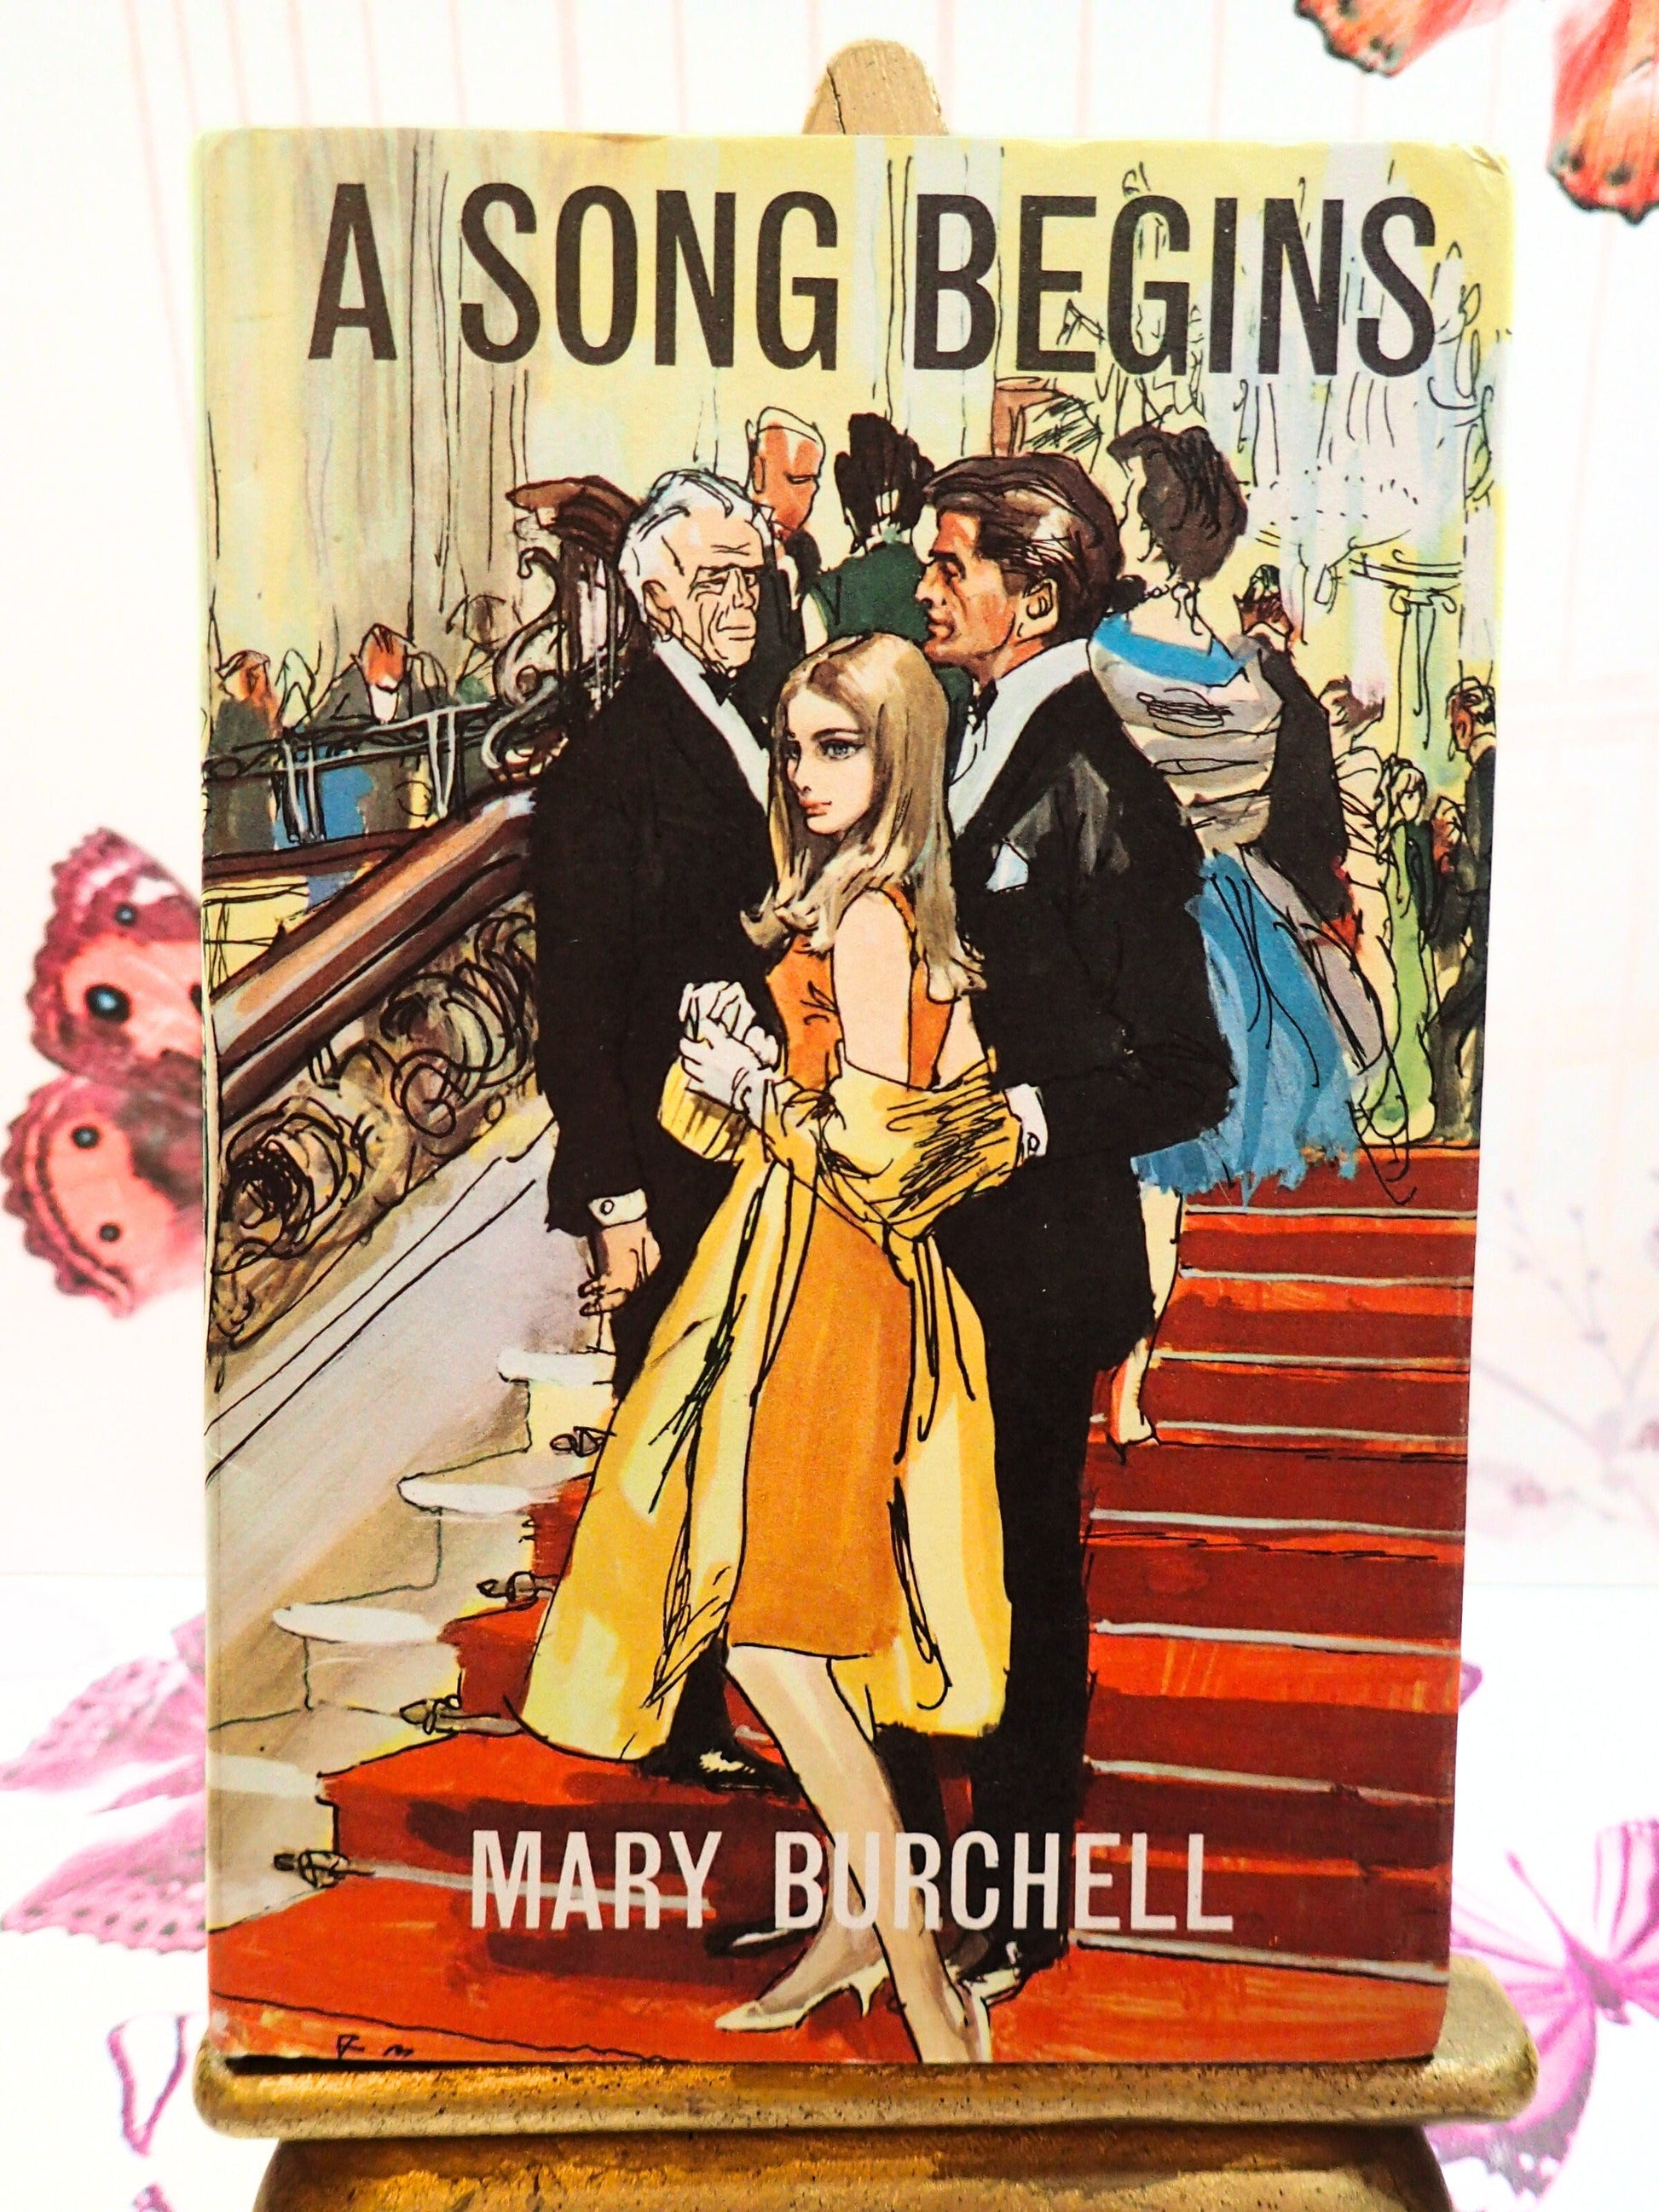 A Song Begins by Mary Burchell 1960's vintage Romance Book